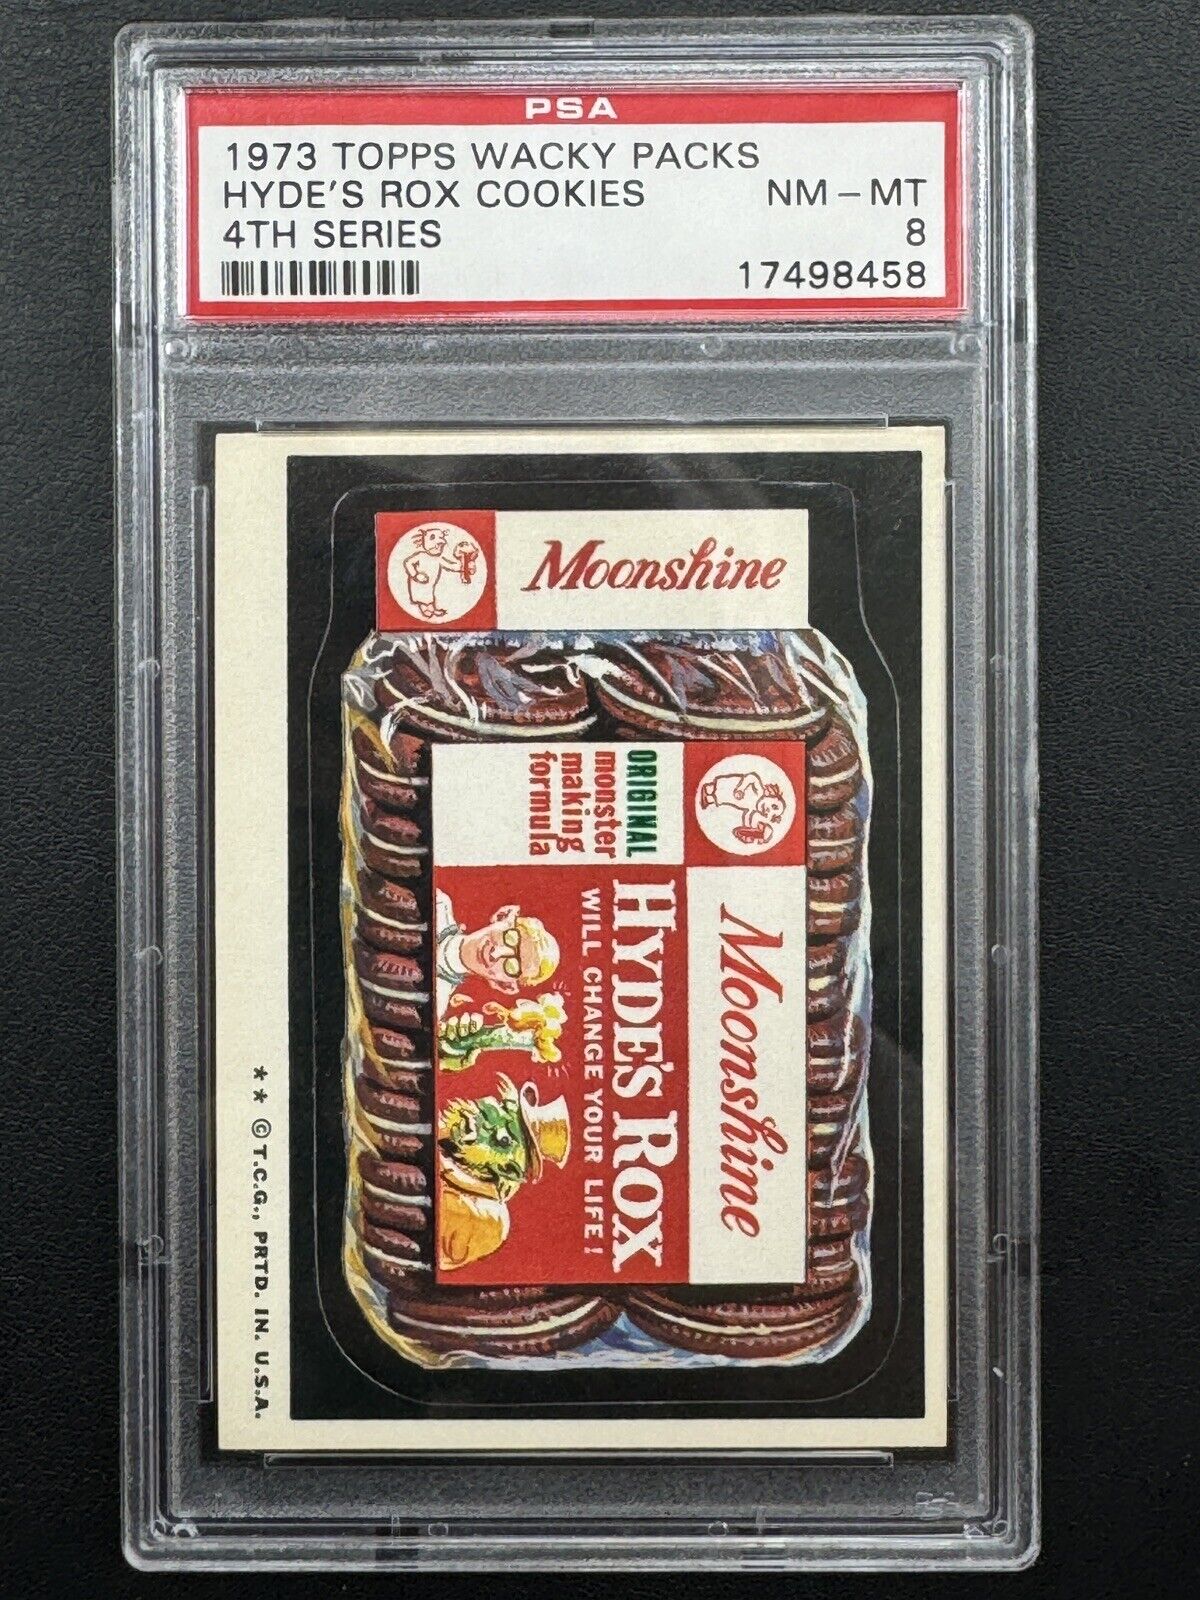 1973 Topps Wacky Packages, Series 4 HYDE'S ROX COOKIES, PSA 8 NM-MT